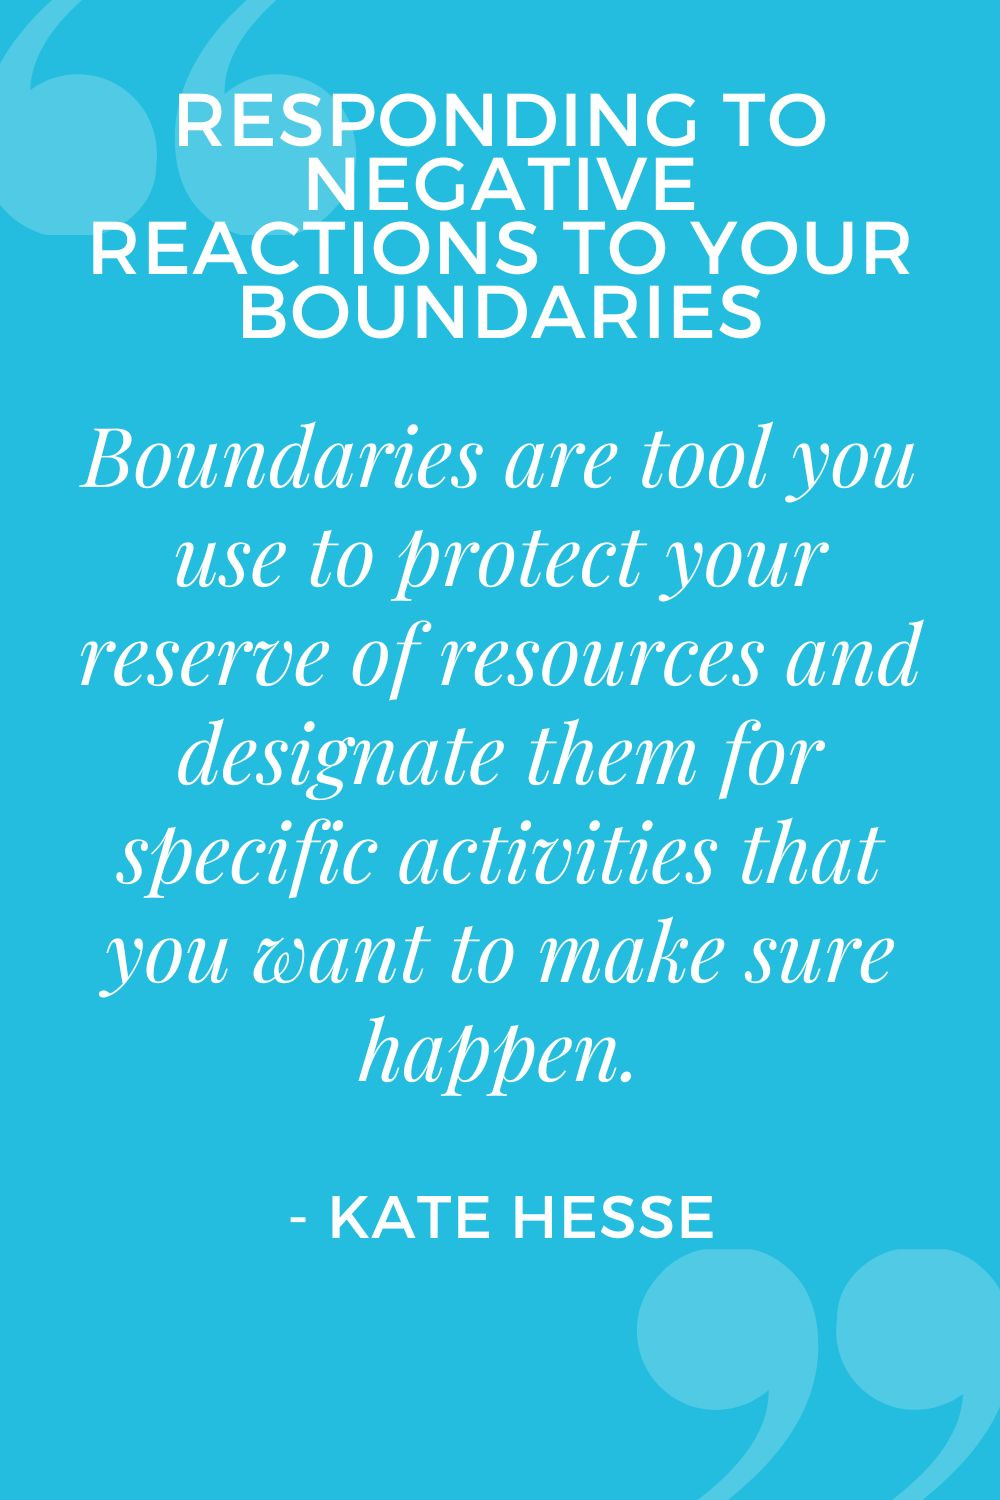 Boundaries are tools you use to protect your reserve of resources and designate them for specific activities that you want to make sure happen.